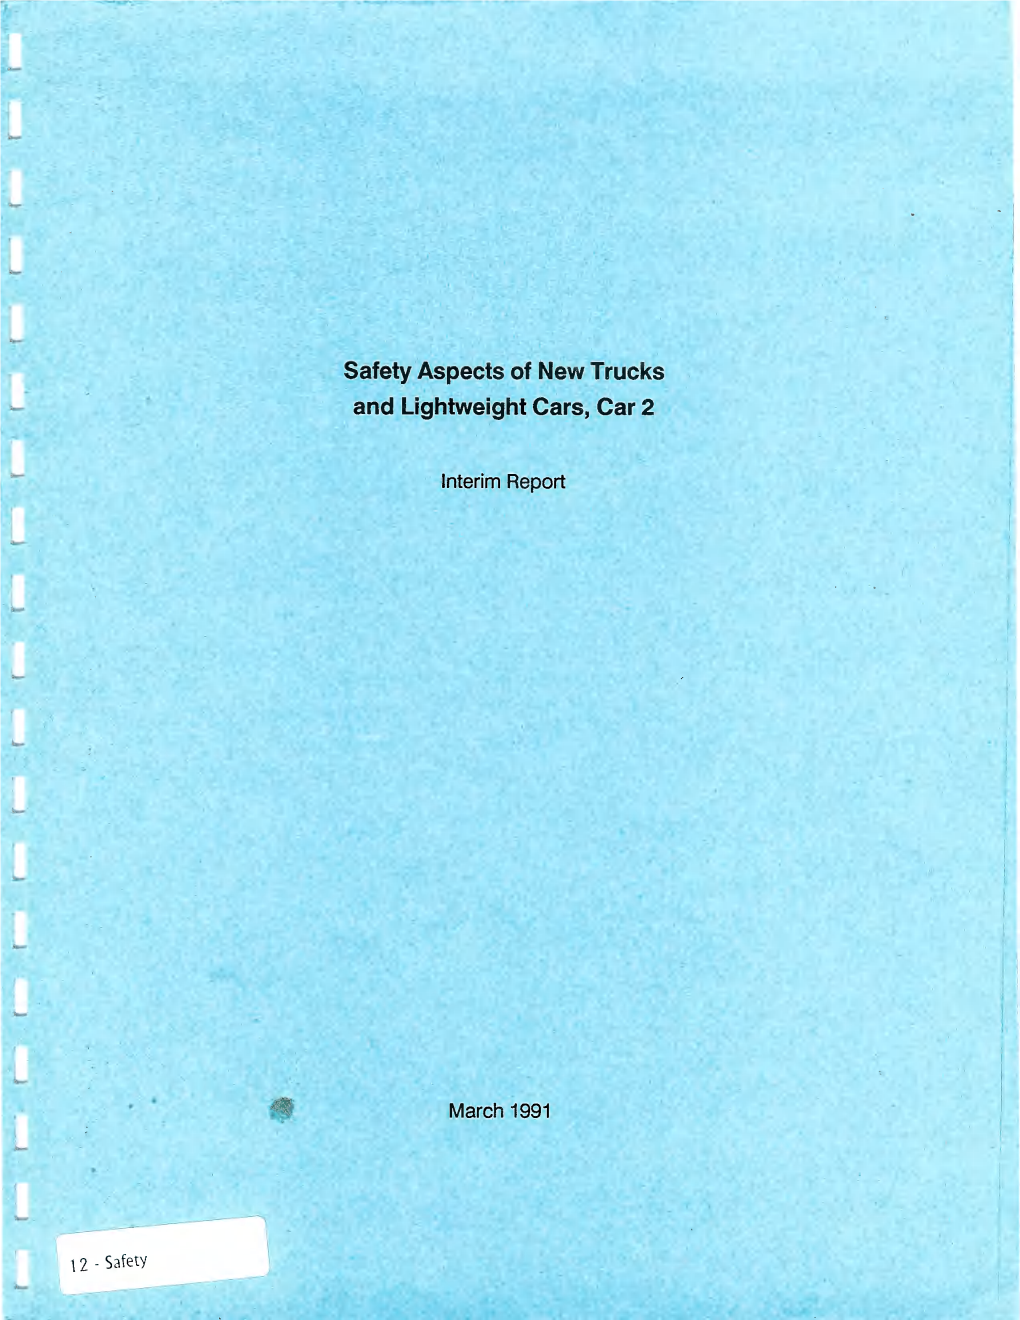 Safety Aspects of New Trucks and Lightweight Cars, Car 2